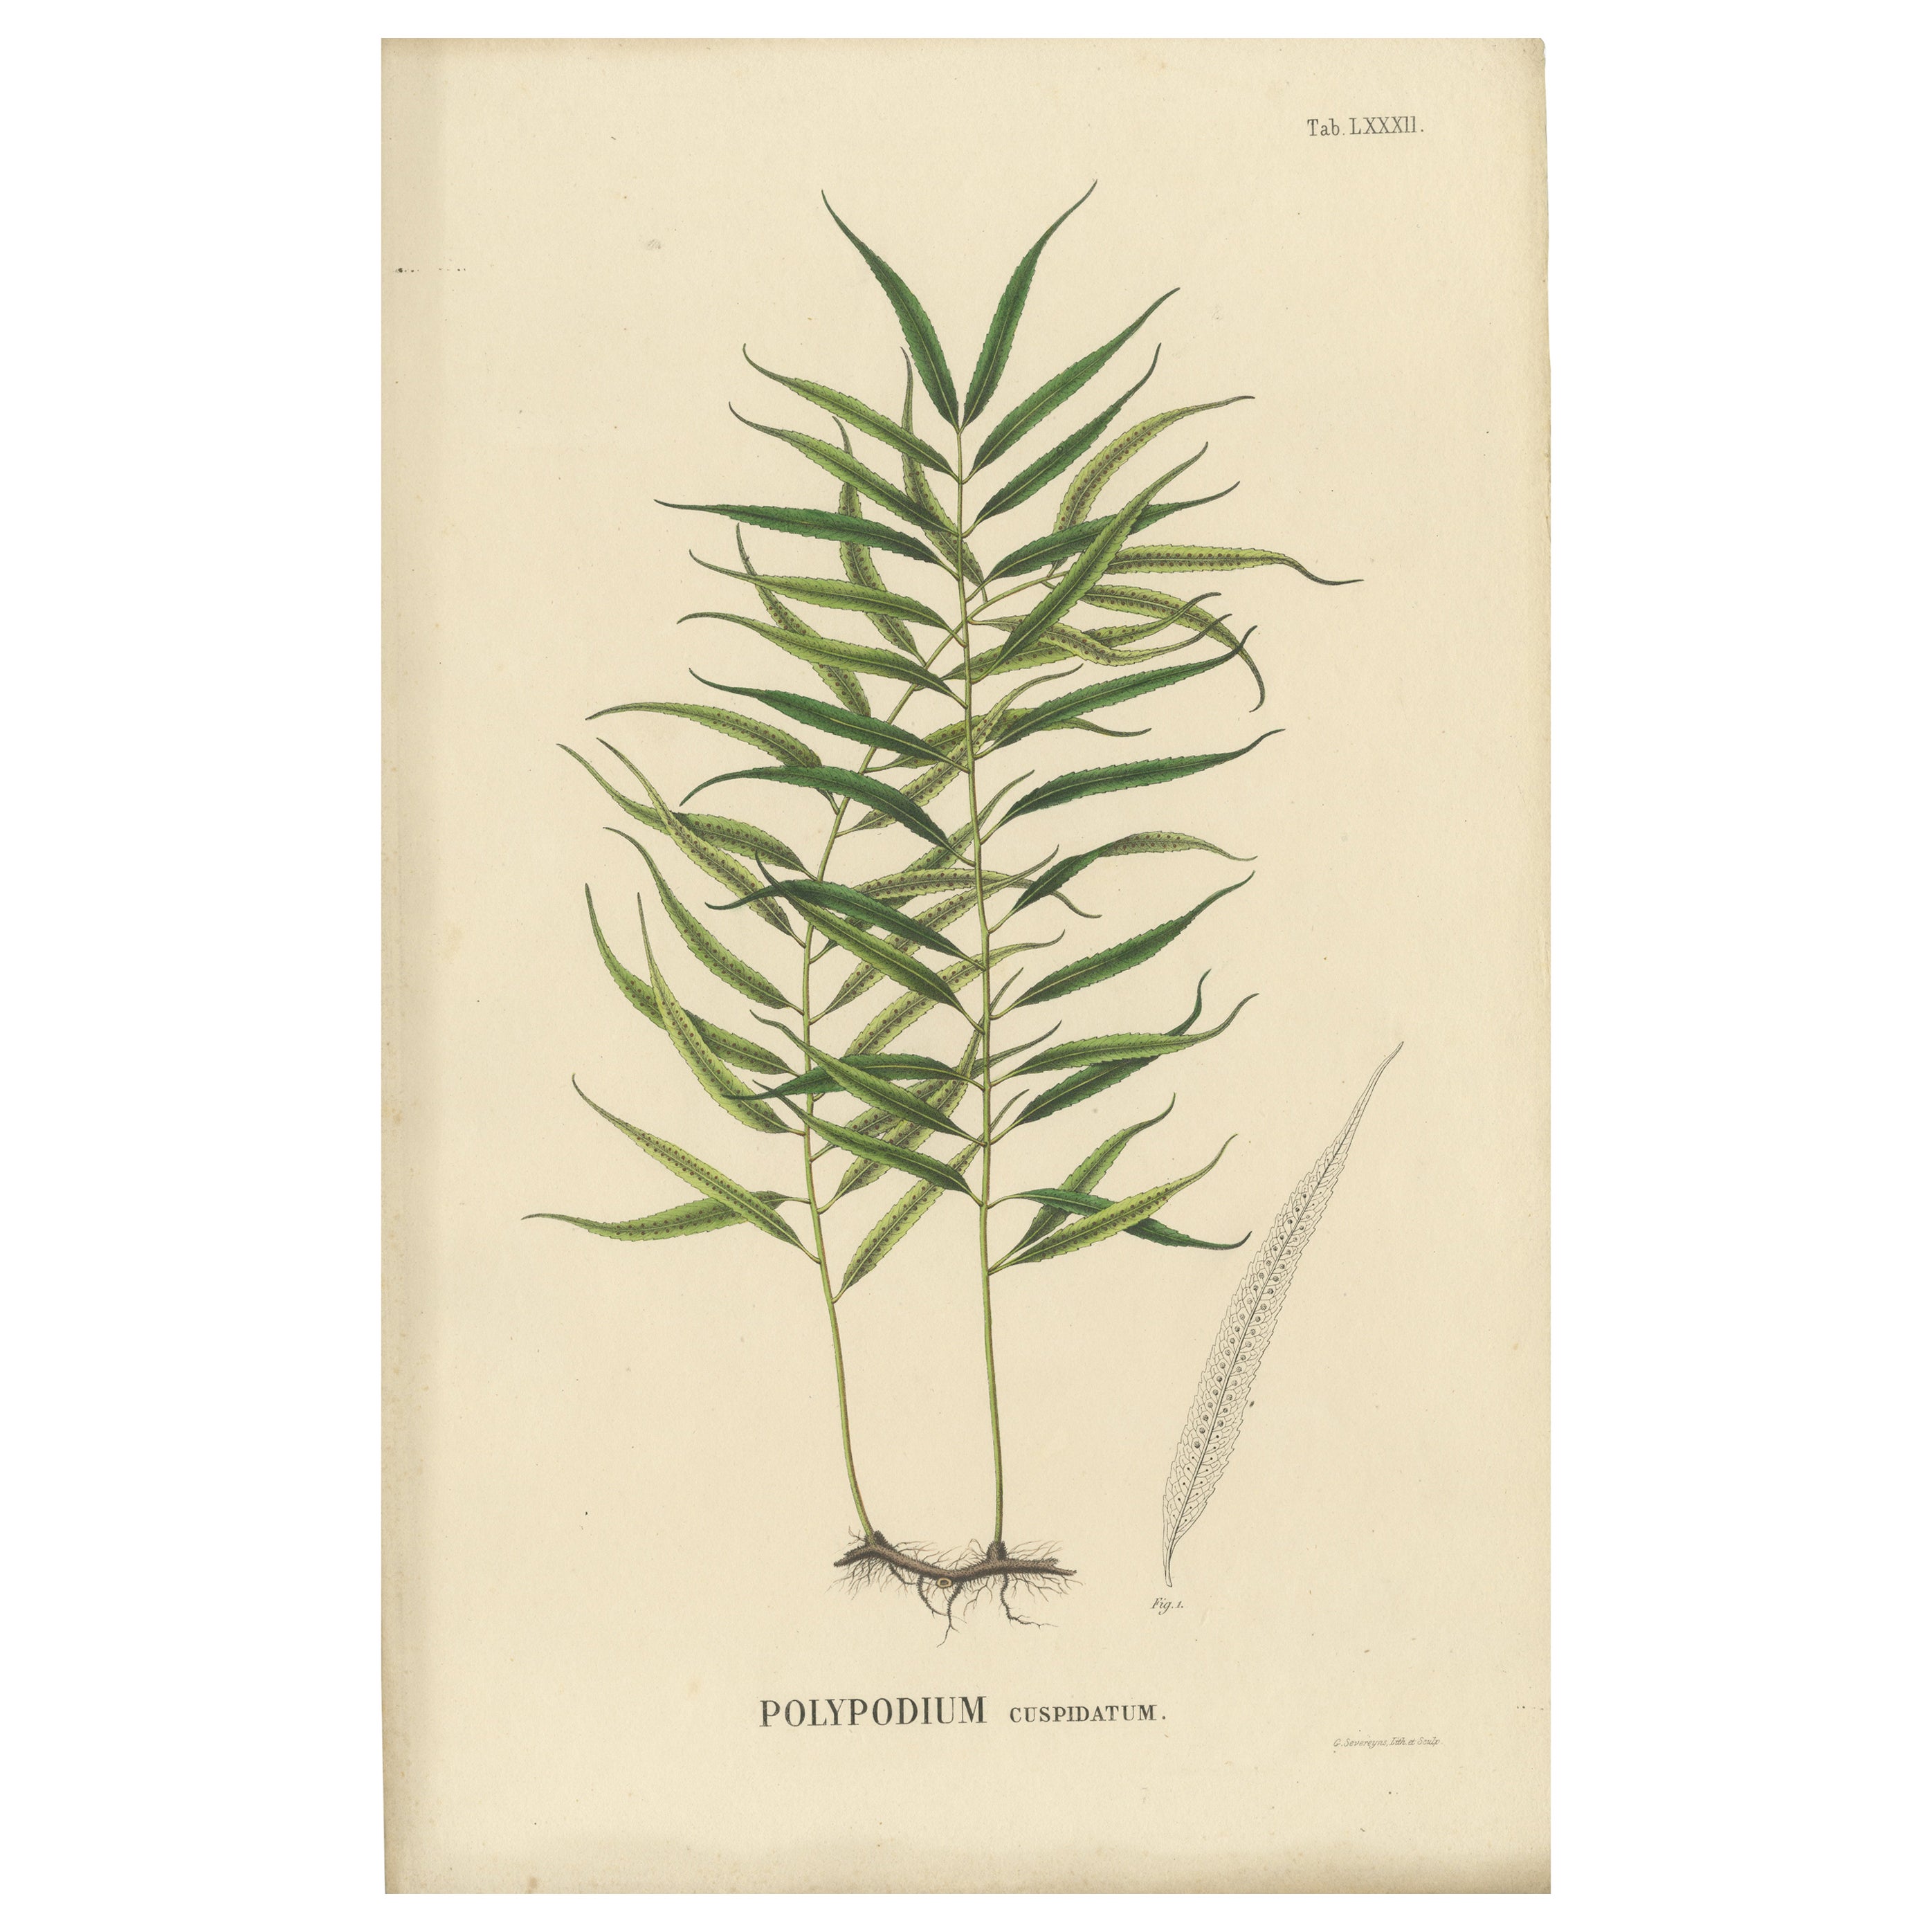 Uniquely Handcolored Lithograph of Ferns of Indonesia 'Polypodium', 1829 